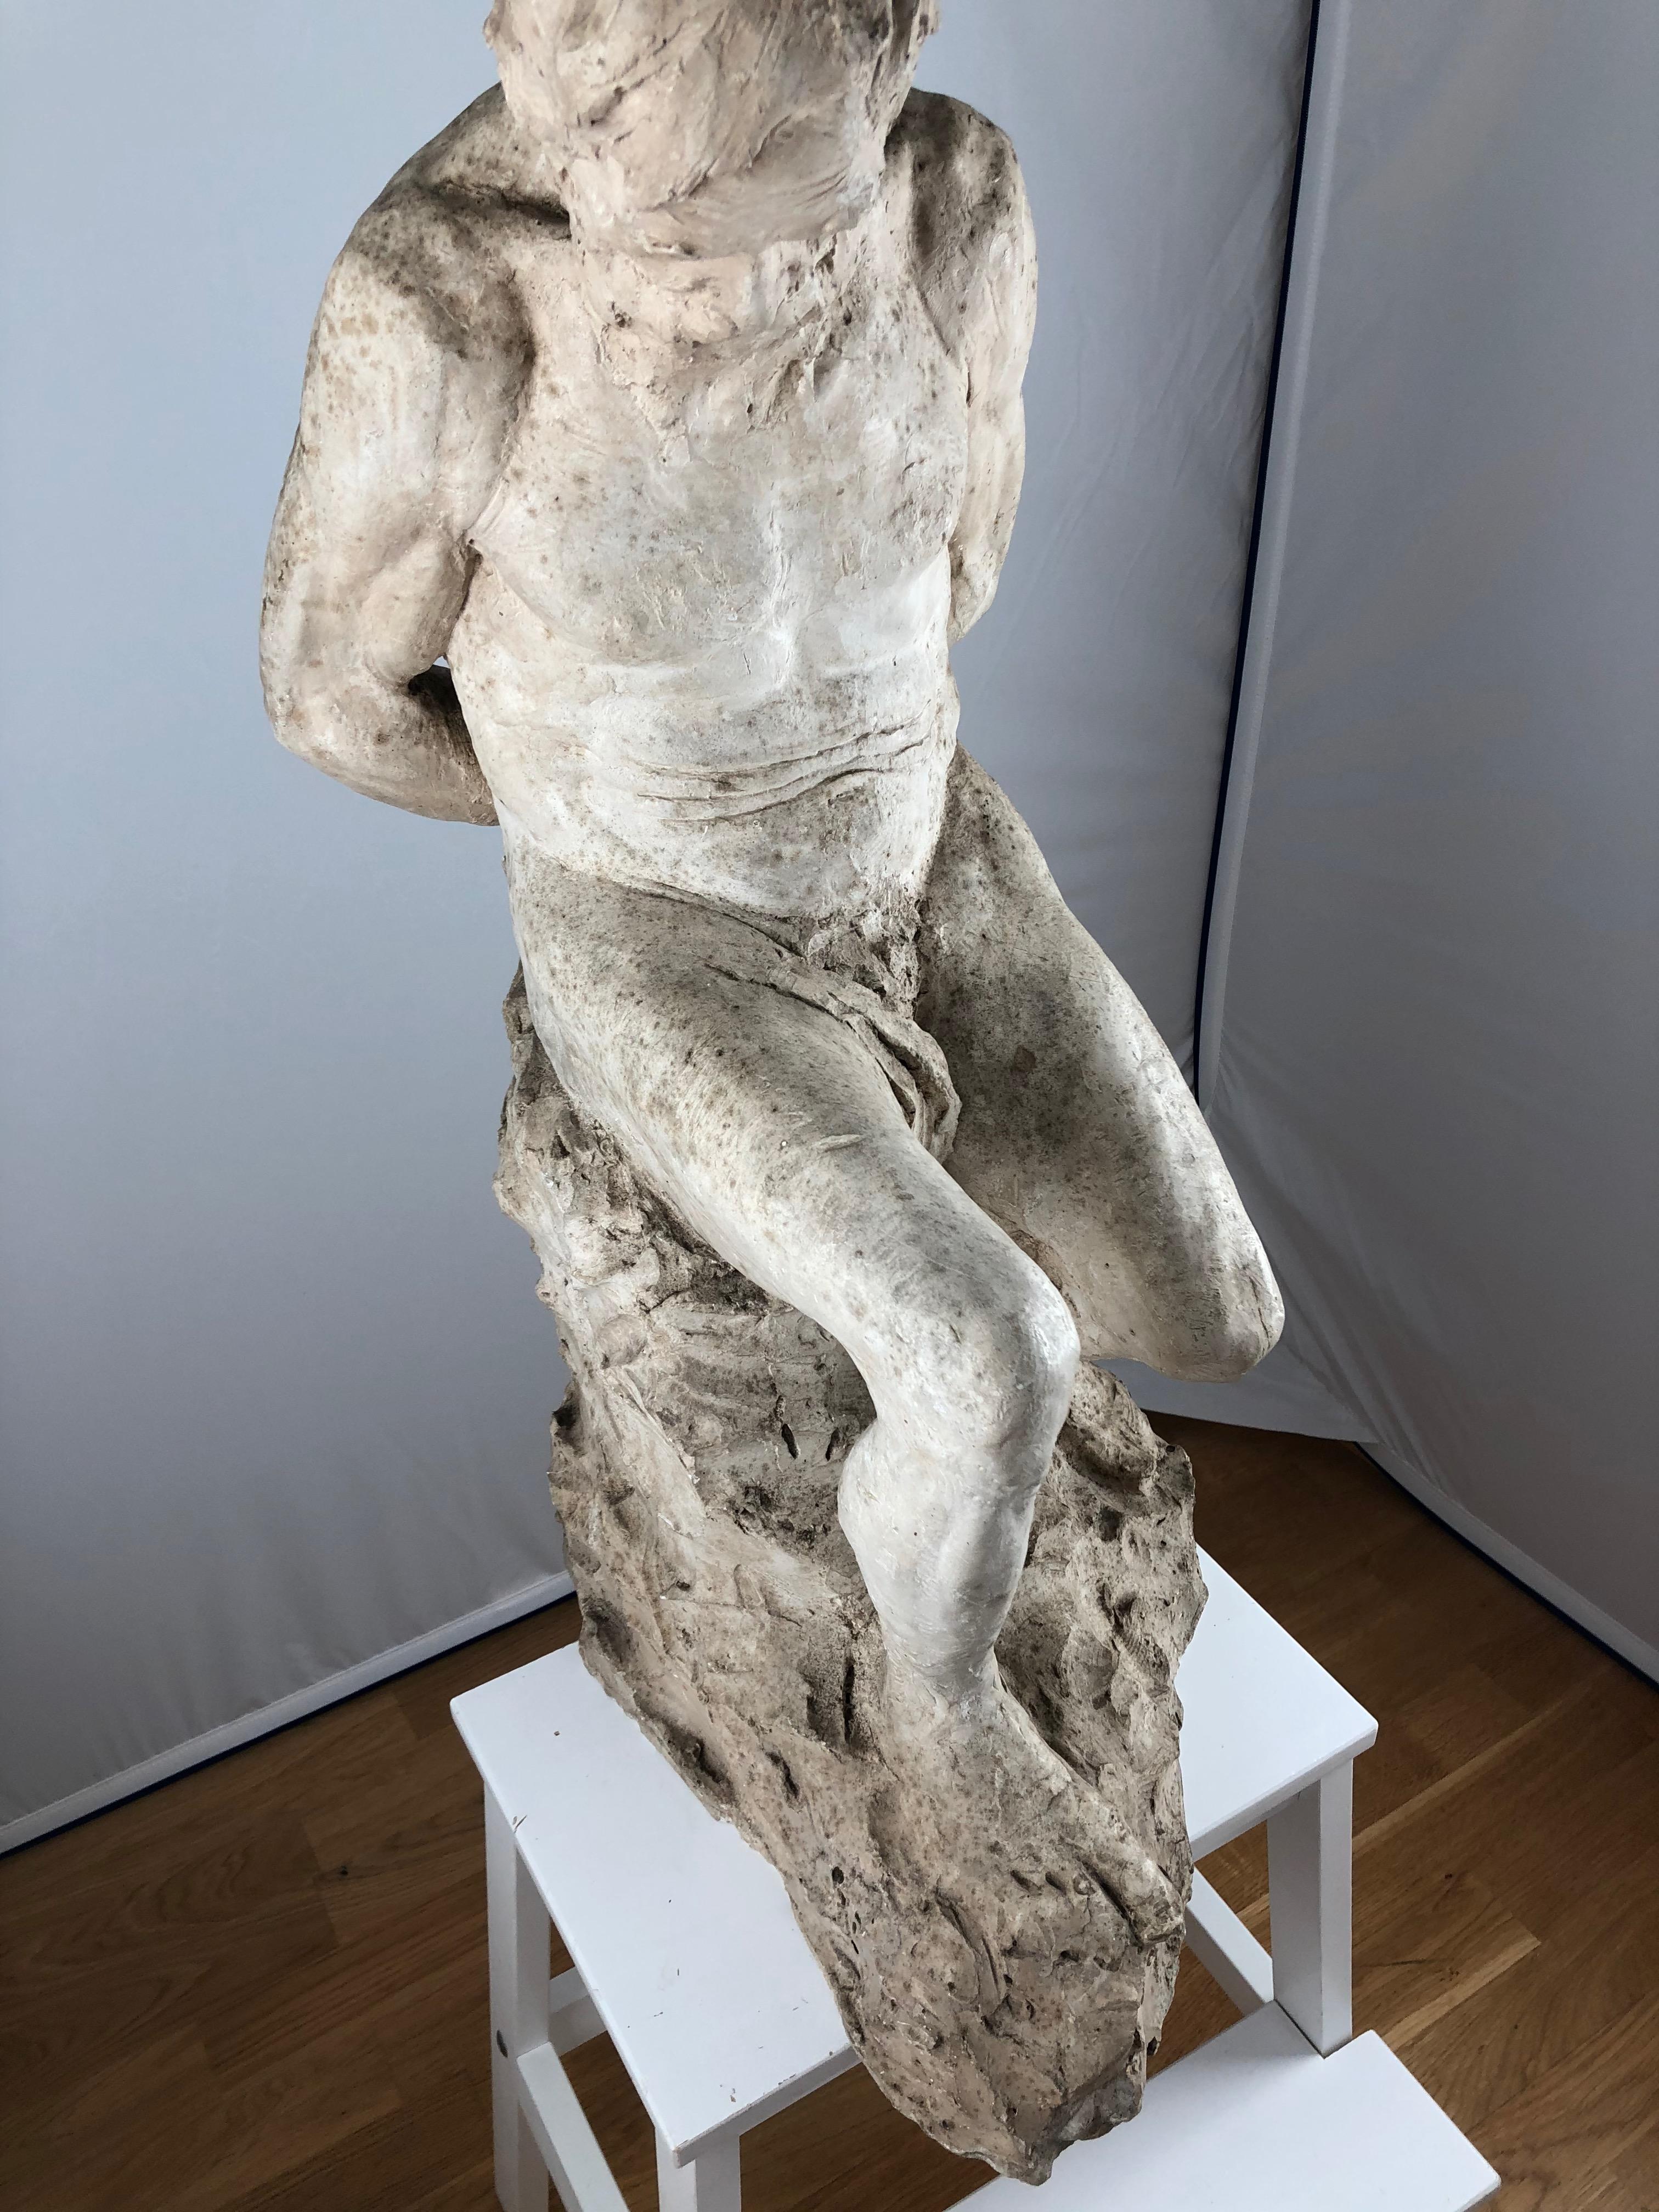 Late 19th Century Sculpture of Plaster, signed Gallé and dated -93 (1893) For Sale